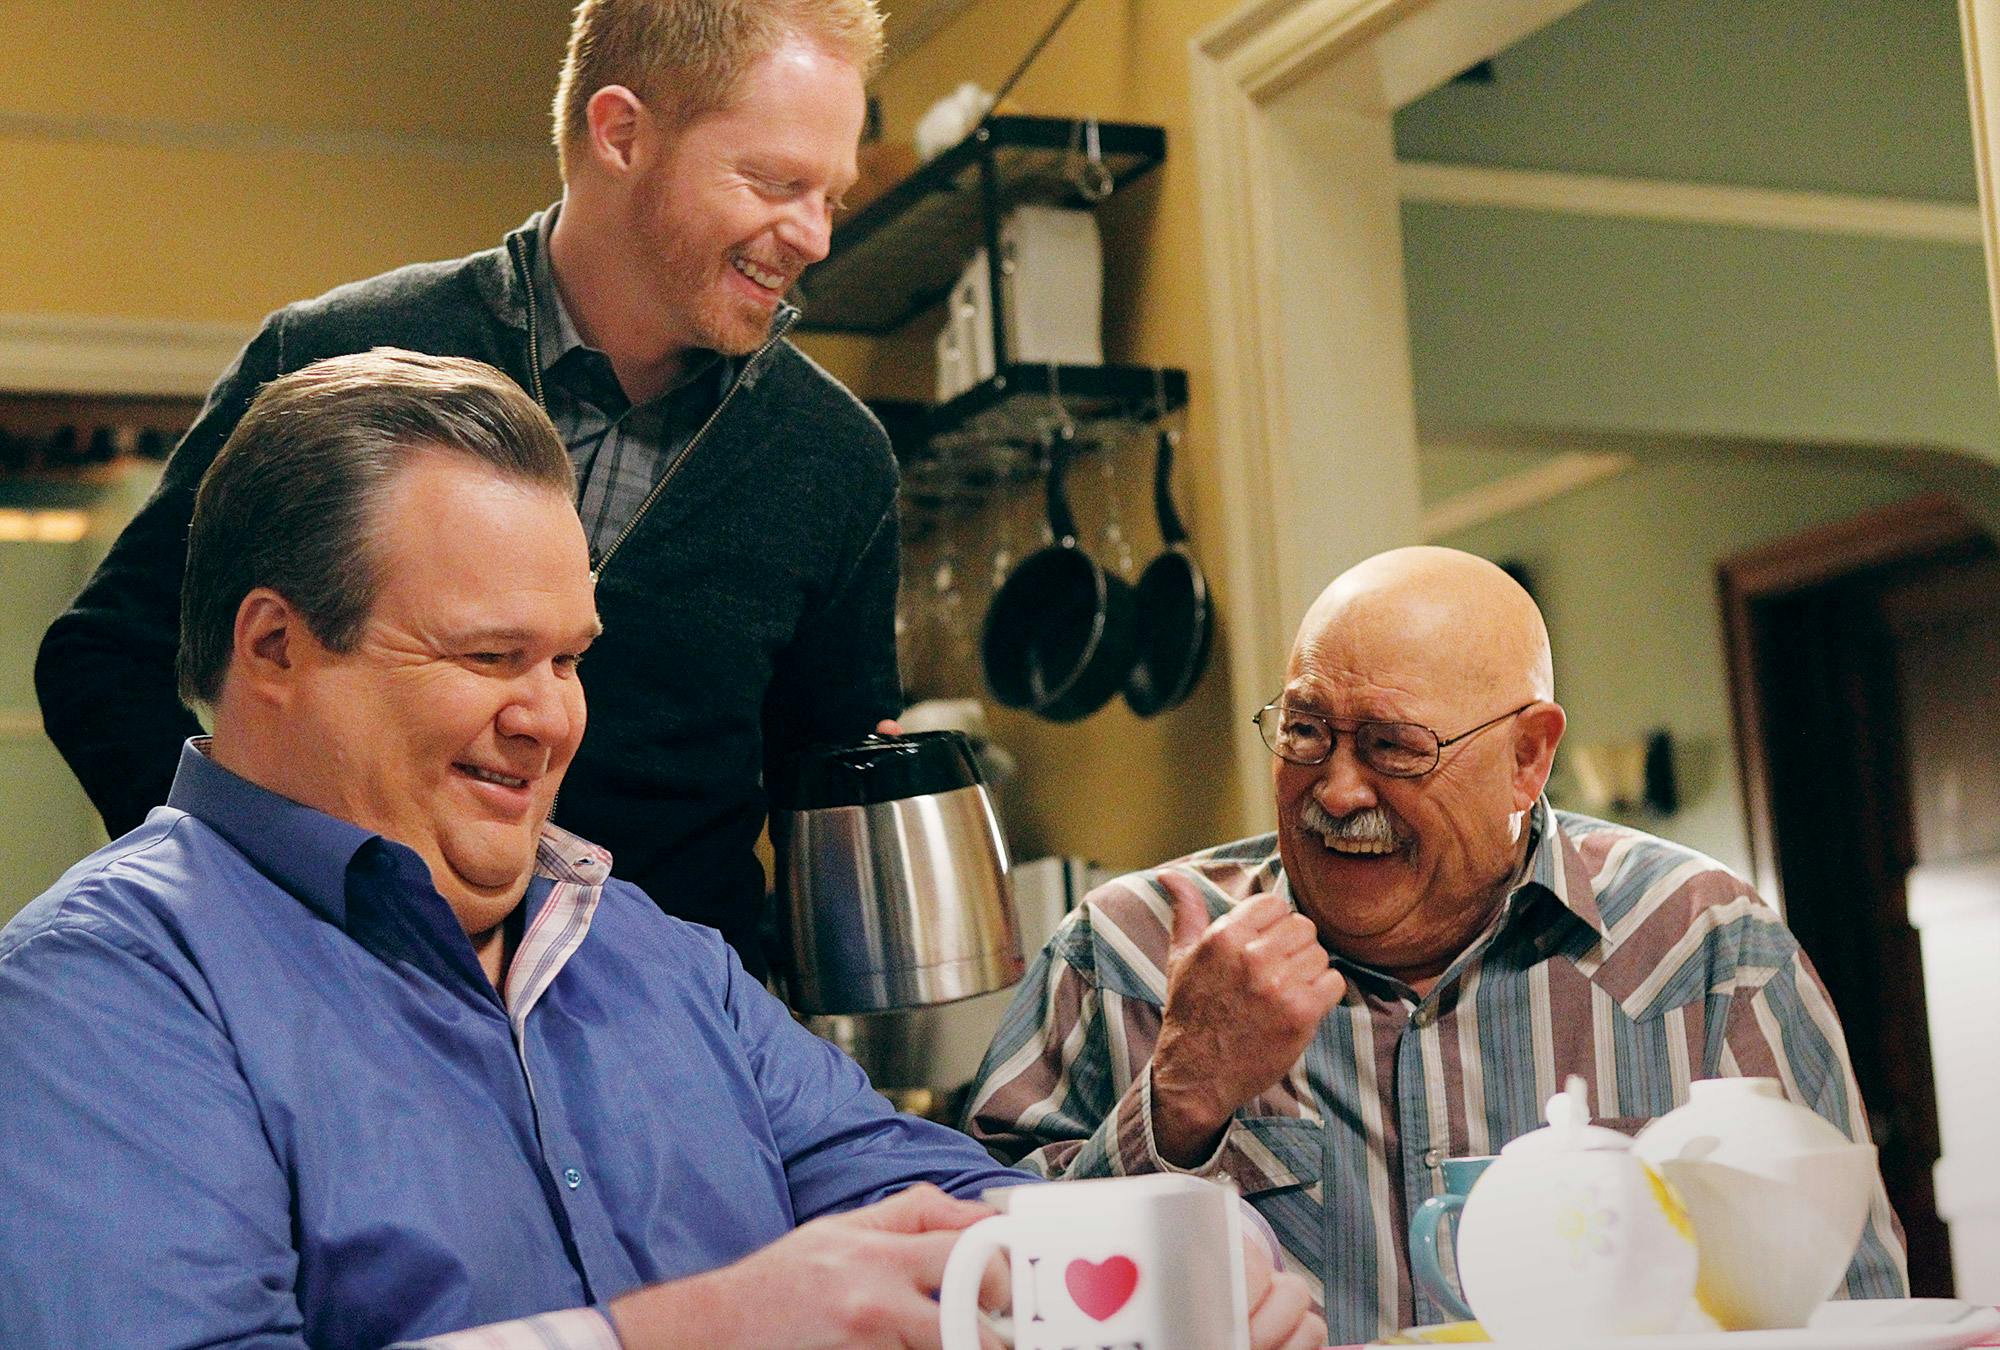 barry corbin with Eric Stonestreet and Jesse Tyle4r Ferguson in modern family